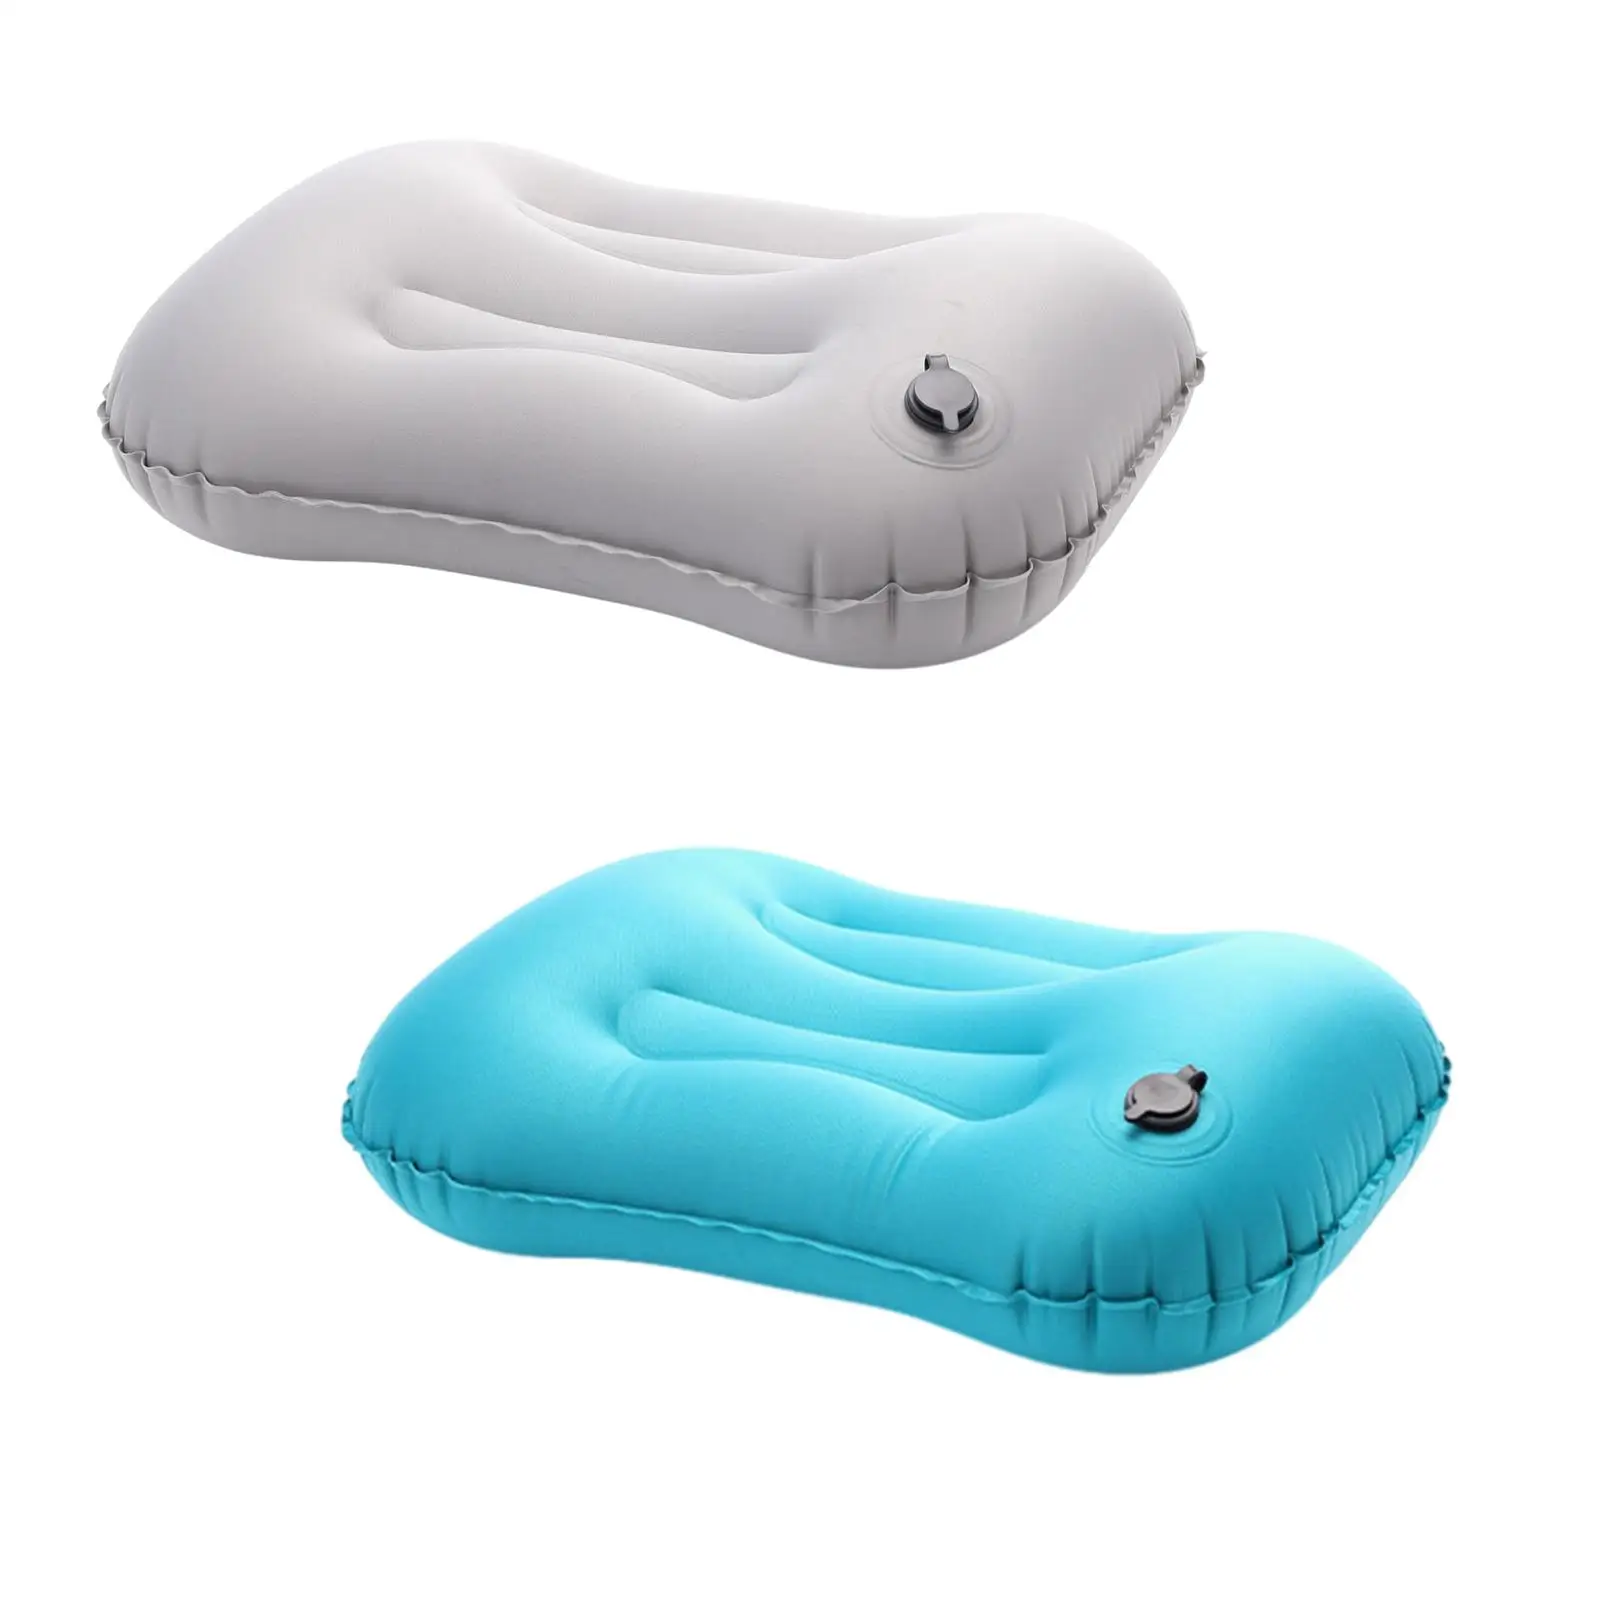 Camping Inflatable Pillow Plane Air Pillow Portable Lightweight Travel Pillow for Backpacking Hammock Hiking Traveling Outdoor